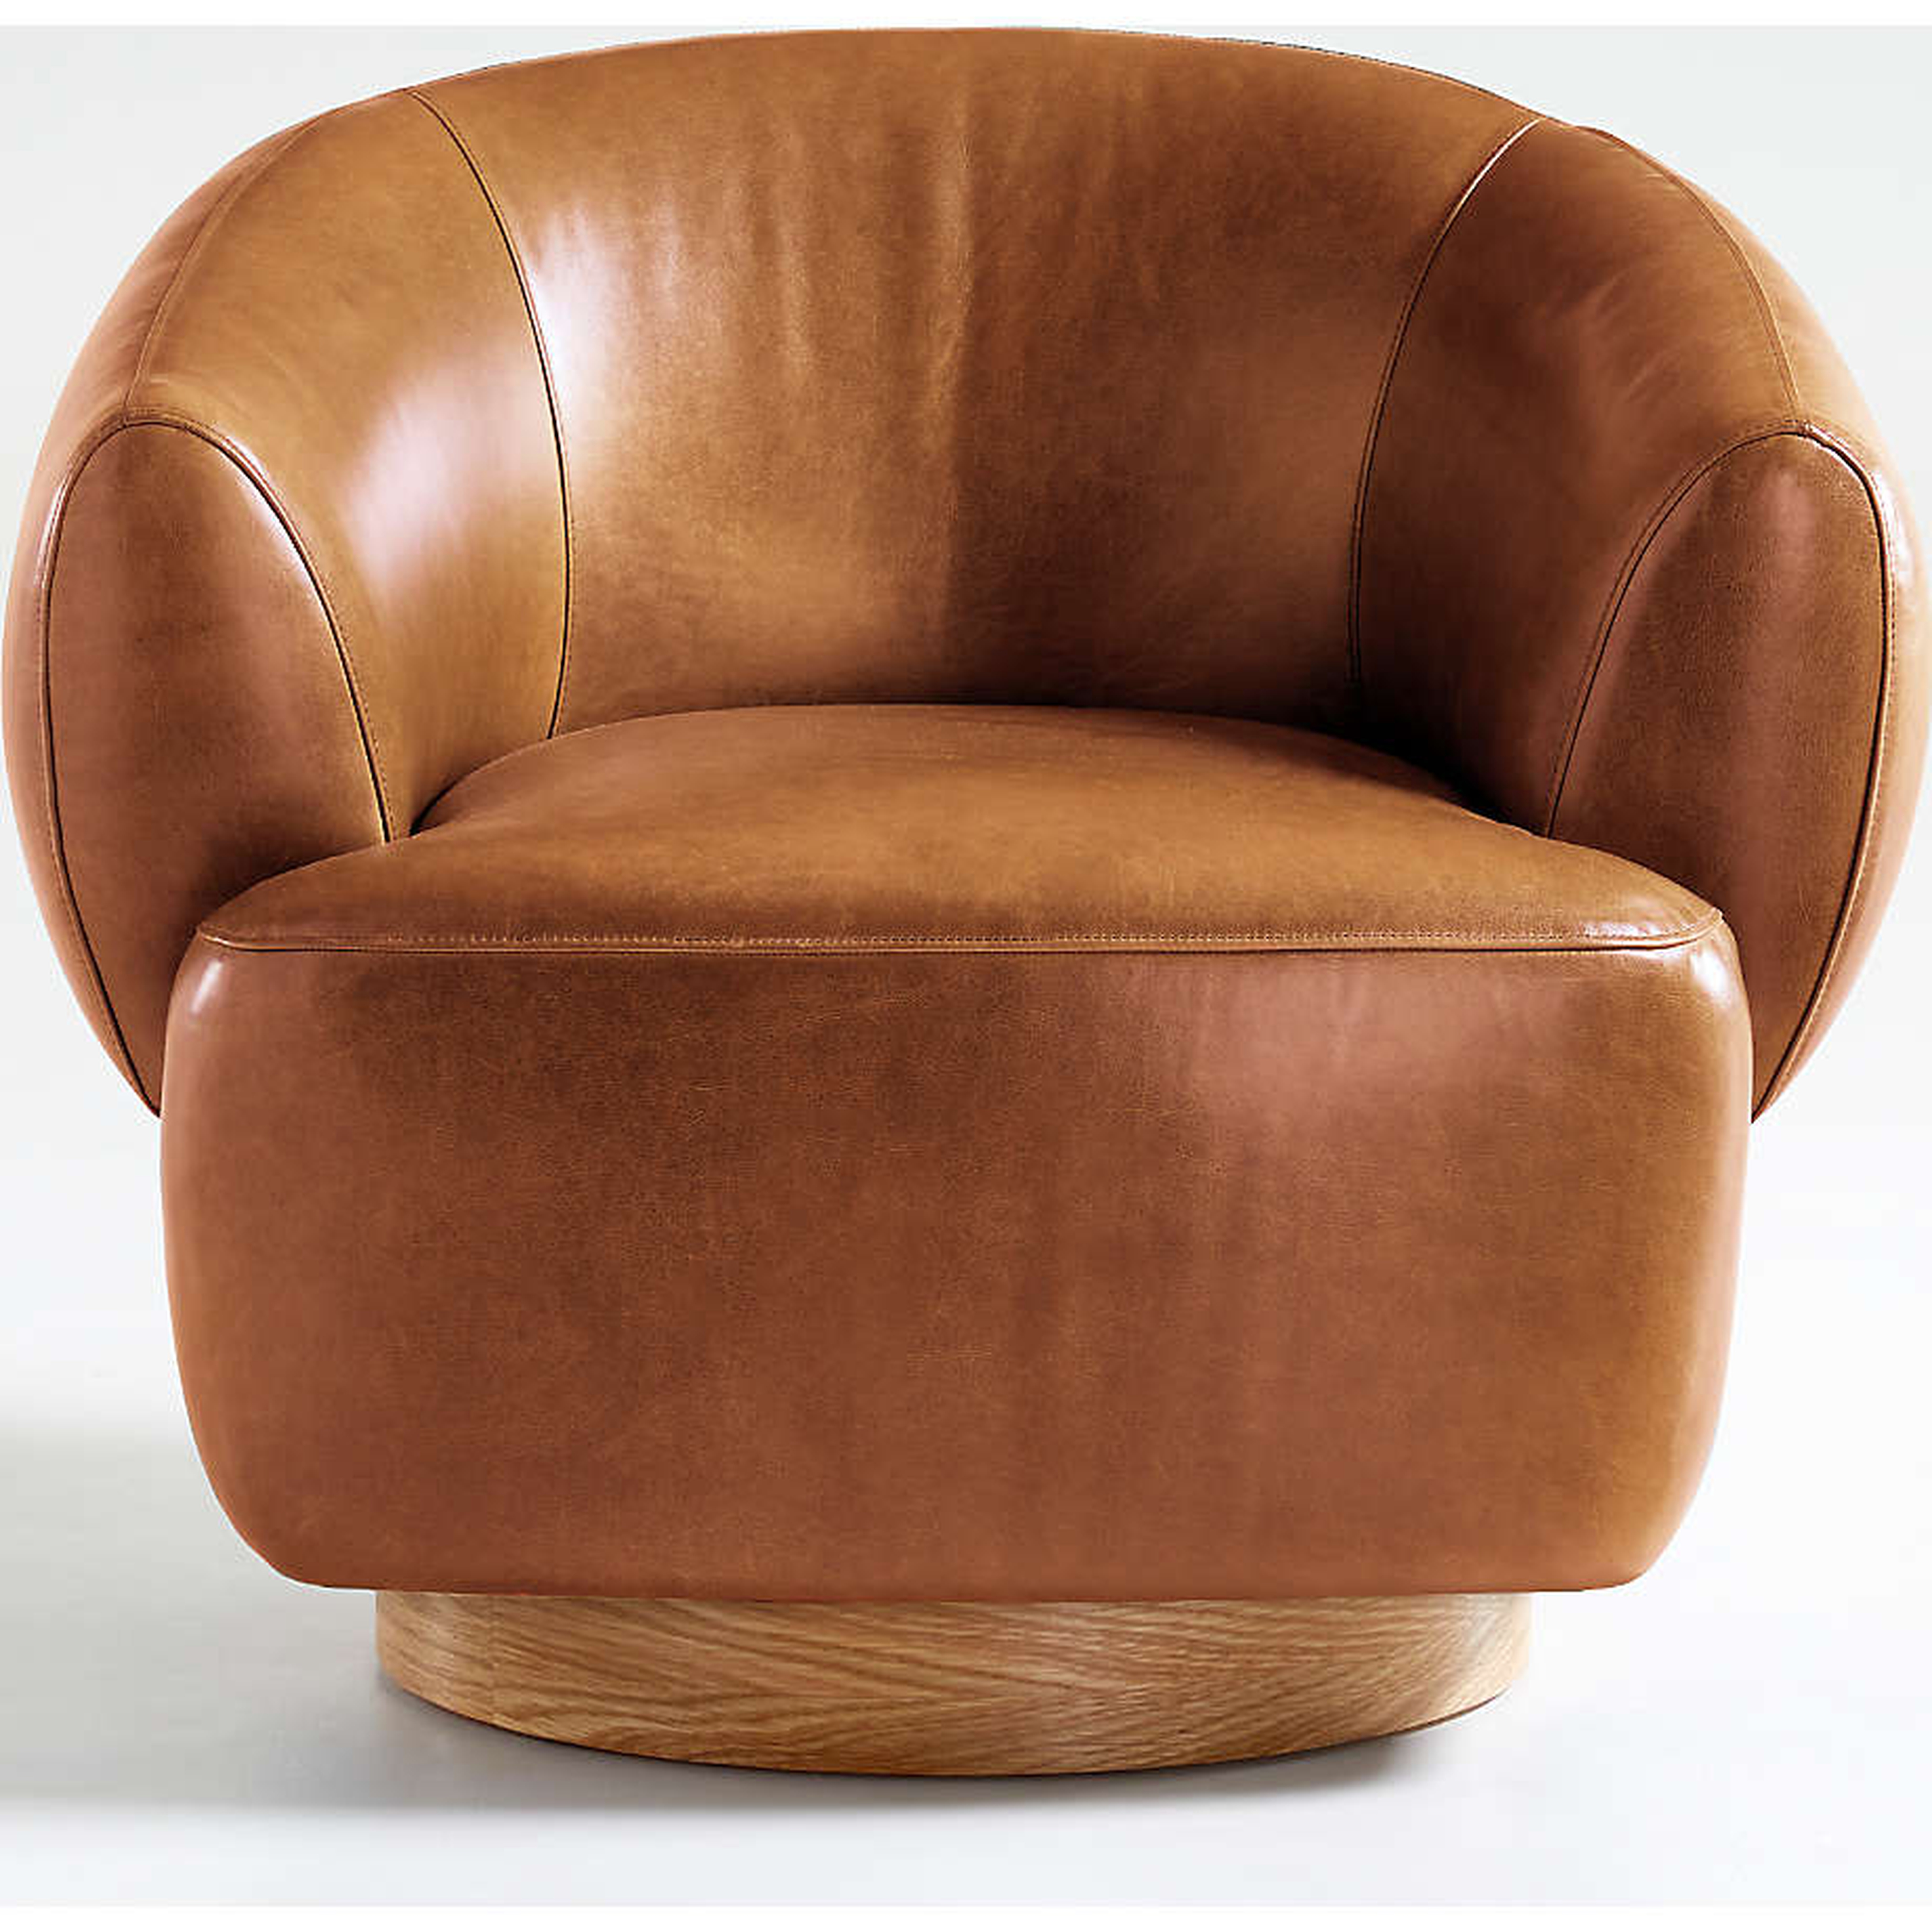 Merrick Leather Swivel Chair - Mont Blanc, Caramel - Crate and Barrel